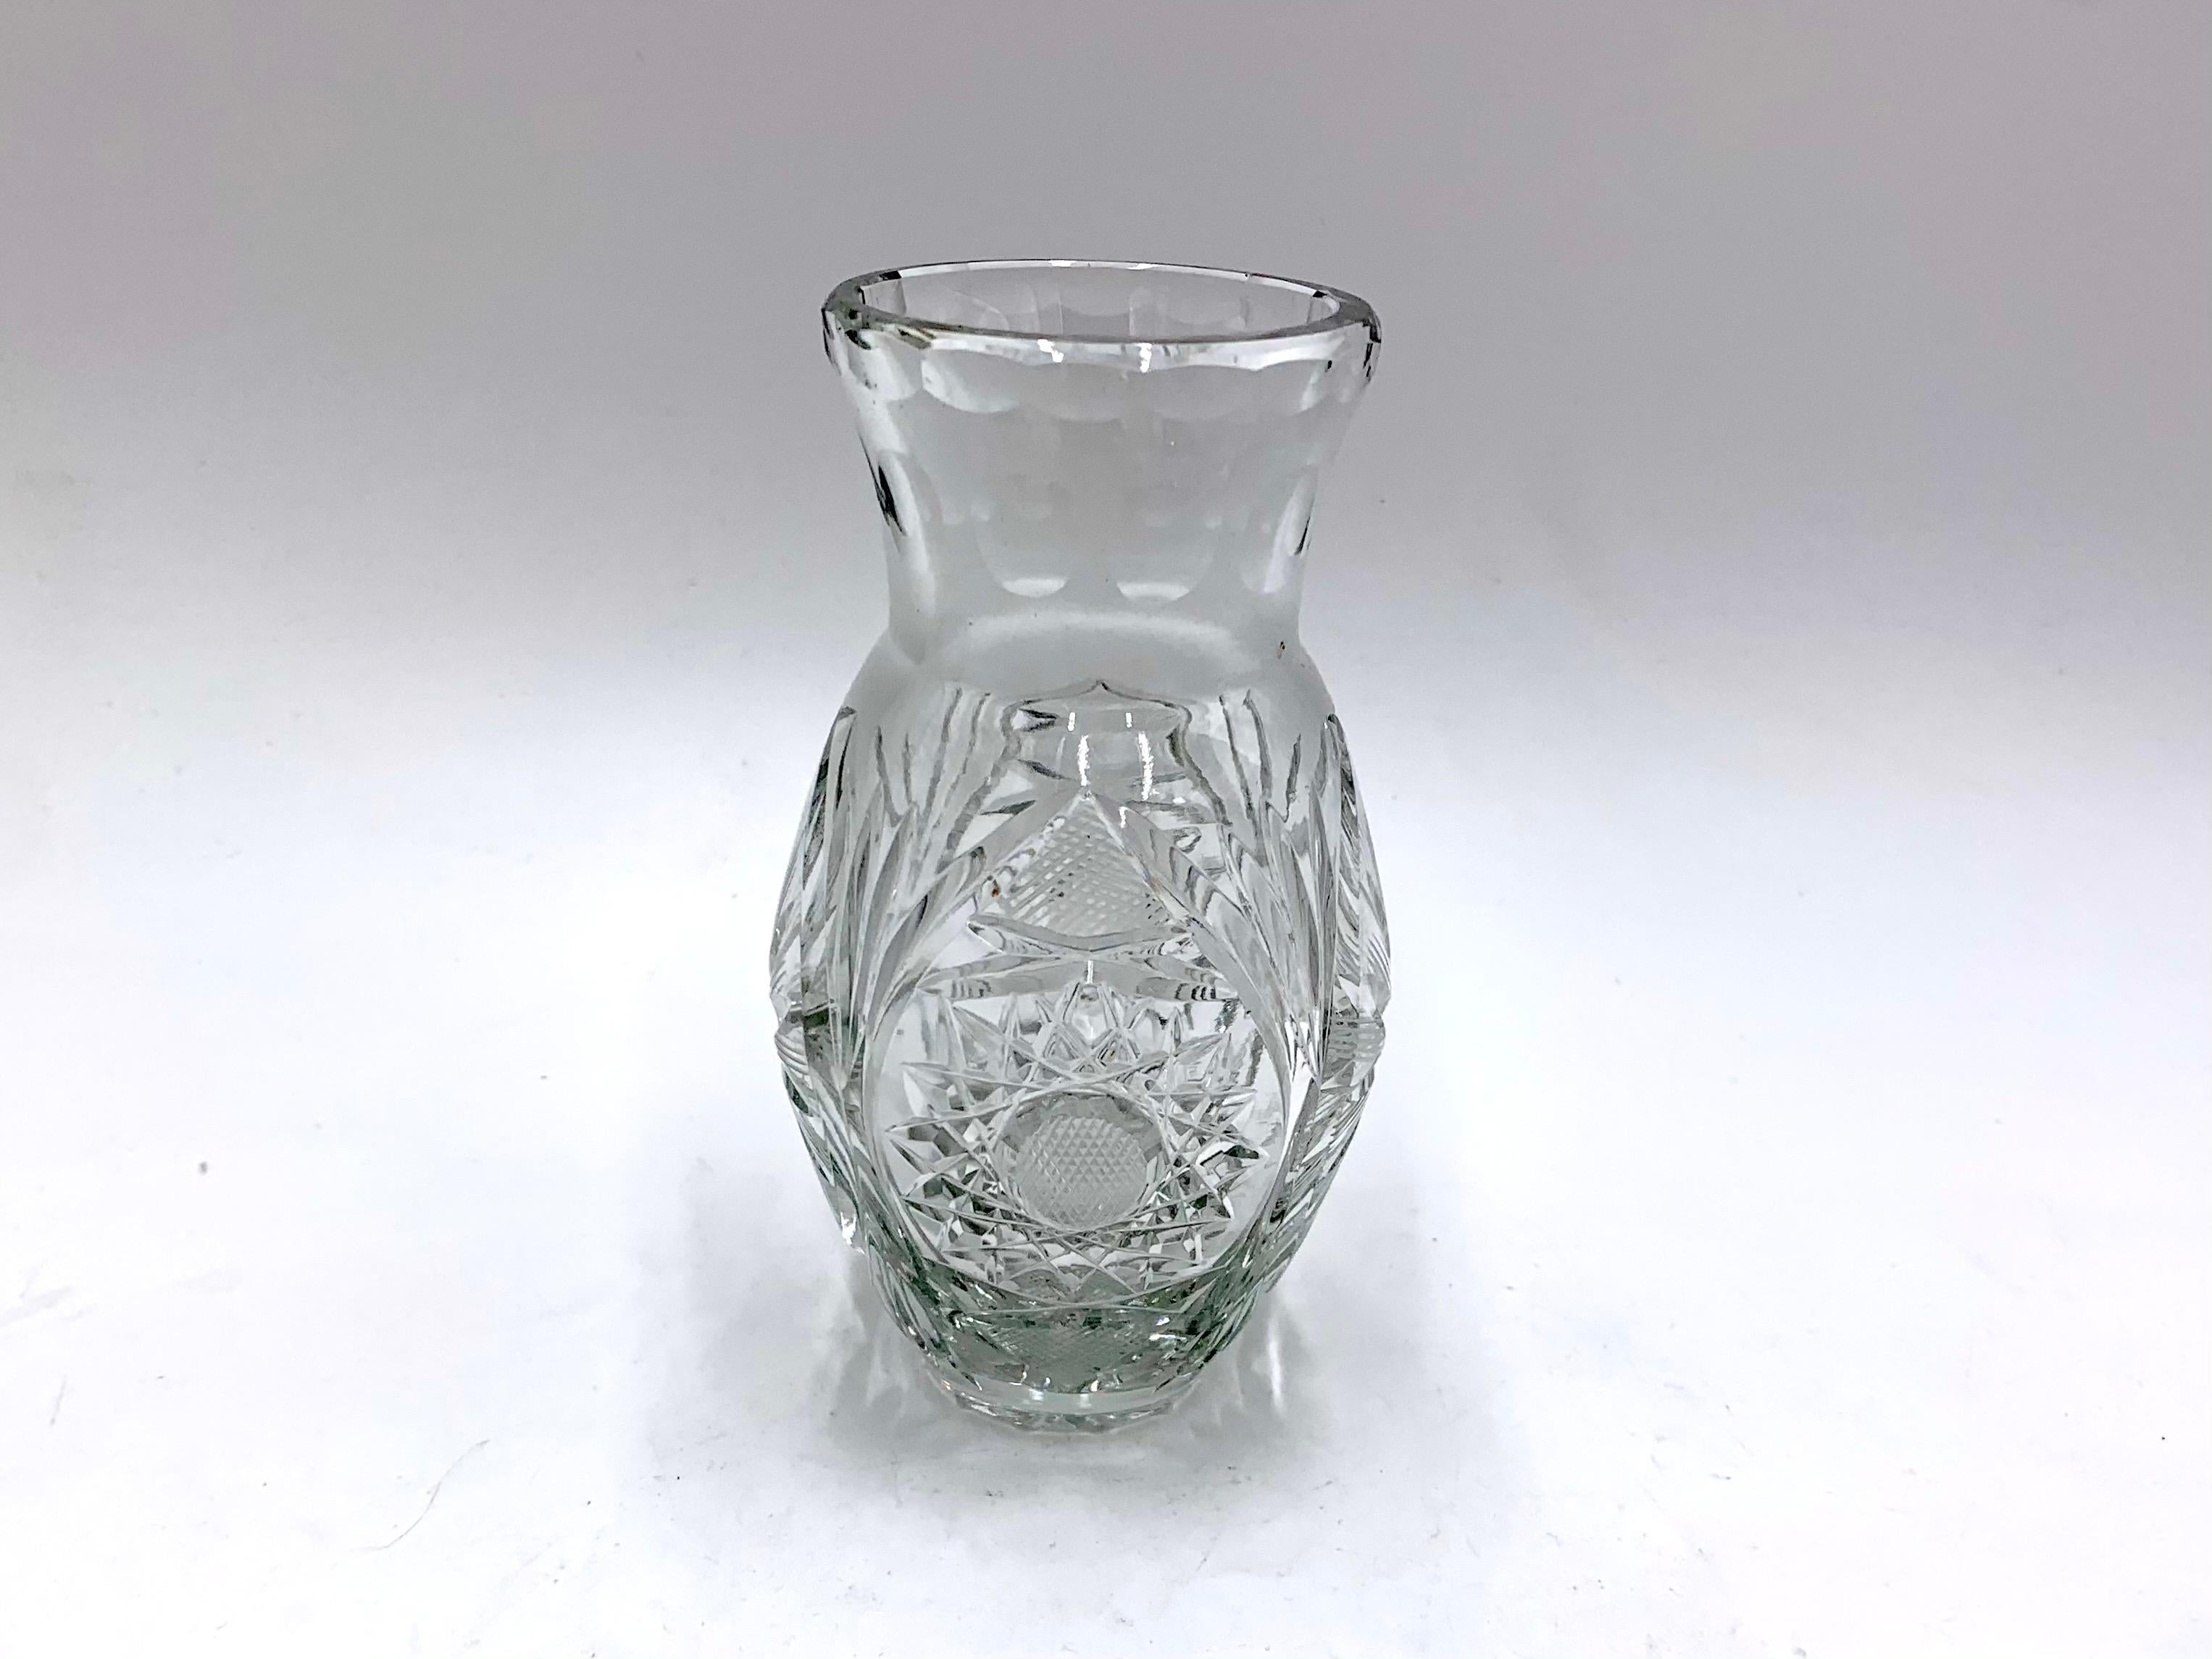 Vase made of crystal. 
The vase was produced in Poland in the 1960s and 1970s.
Vase in very good condition
Measures: Height 14cm / diameter 6 cm.